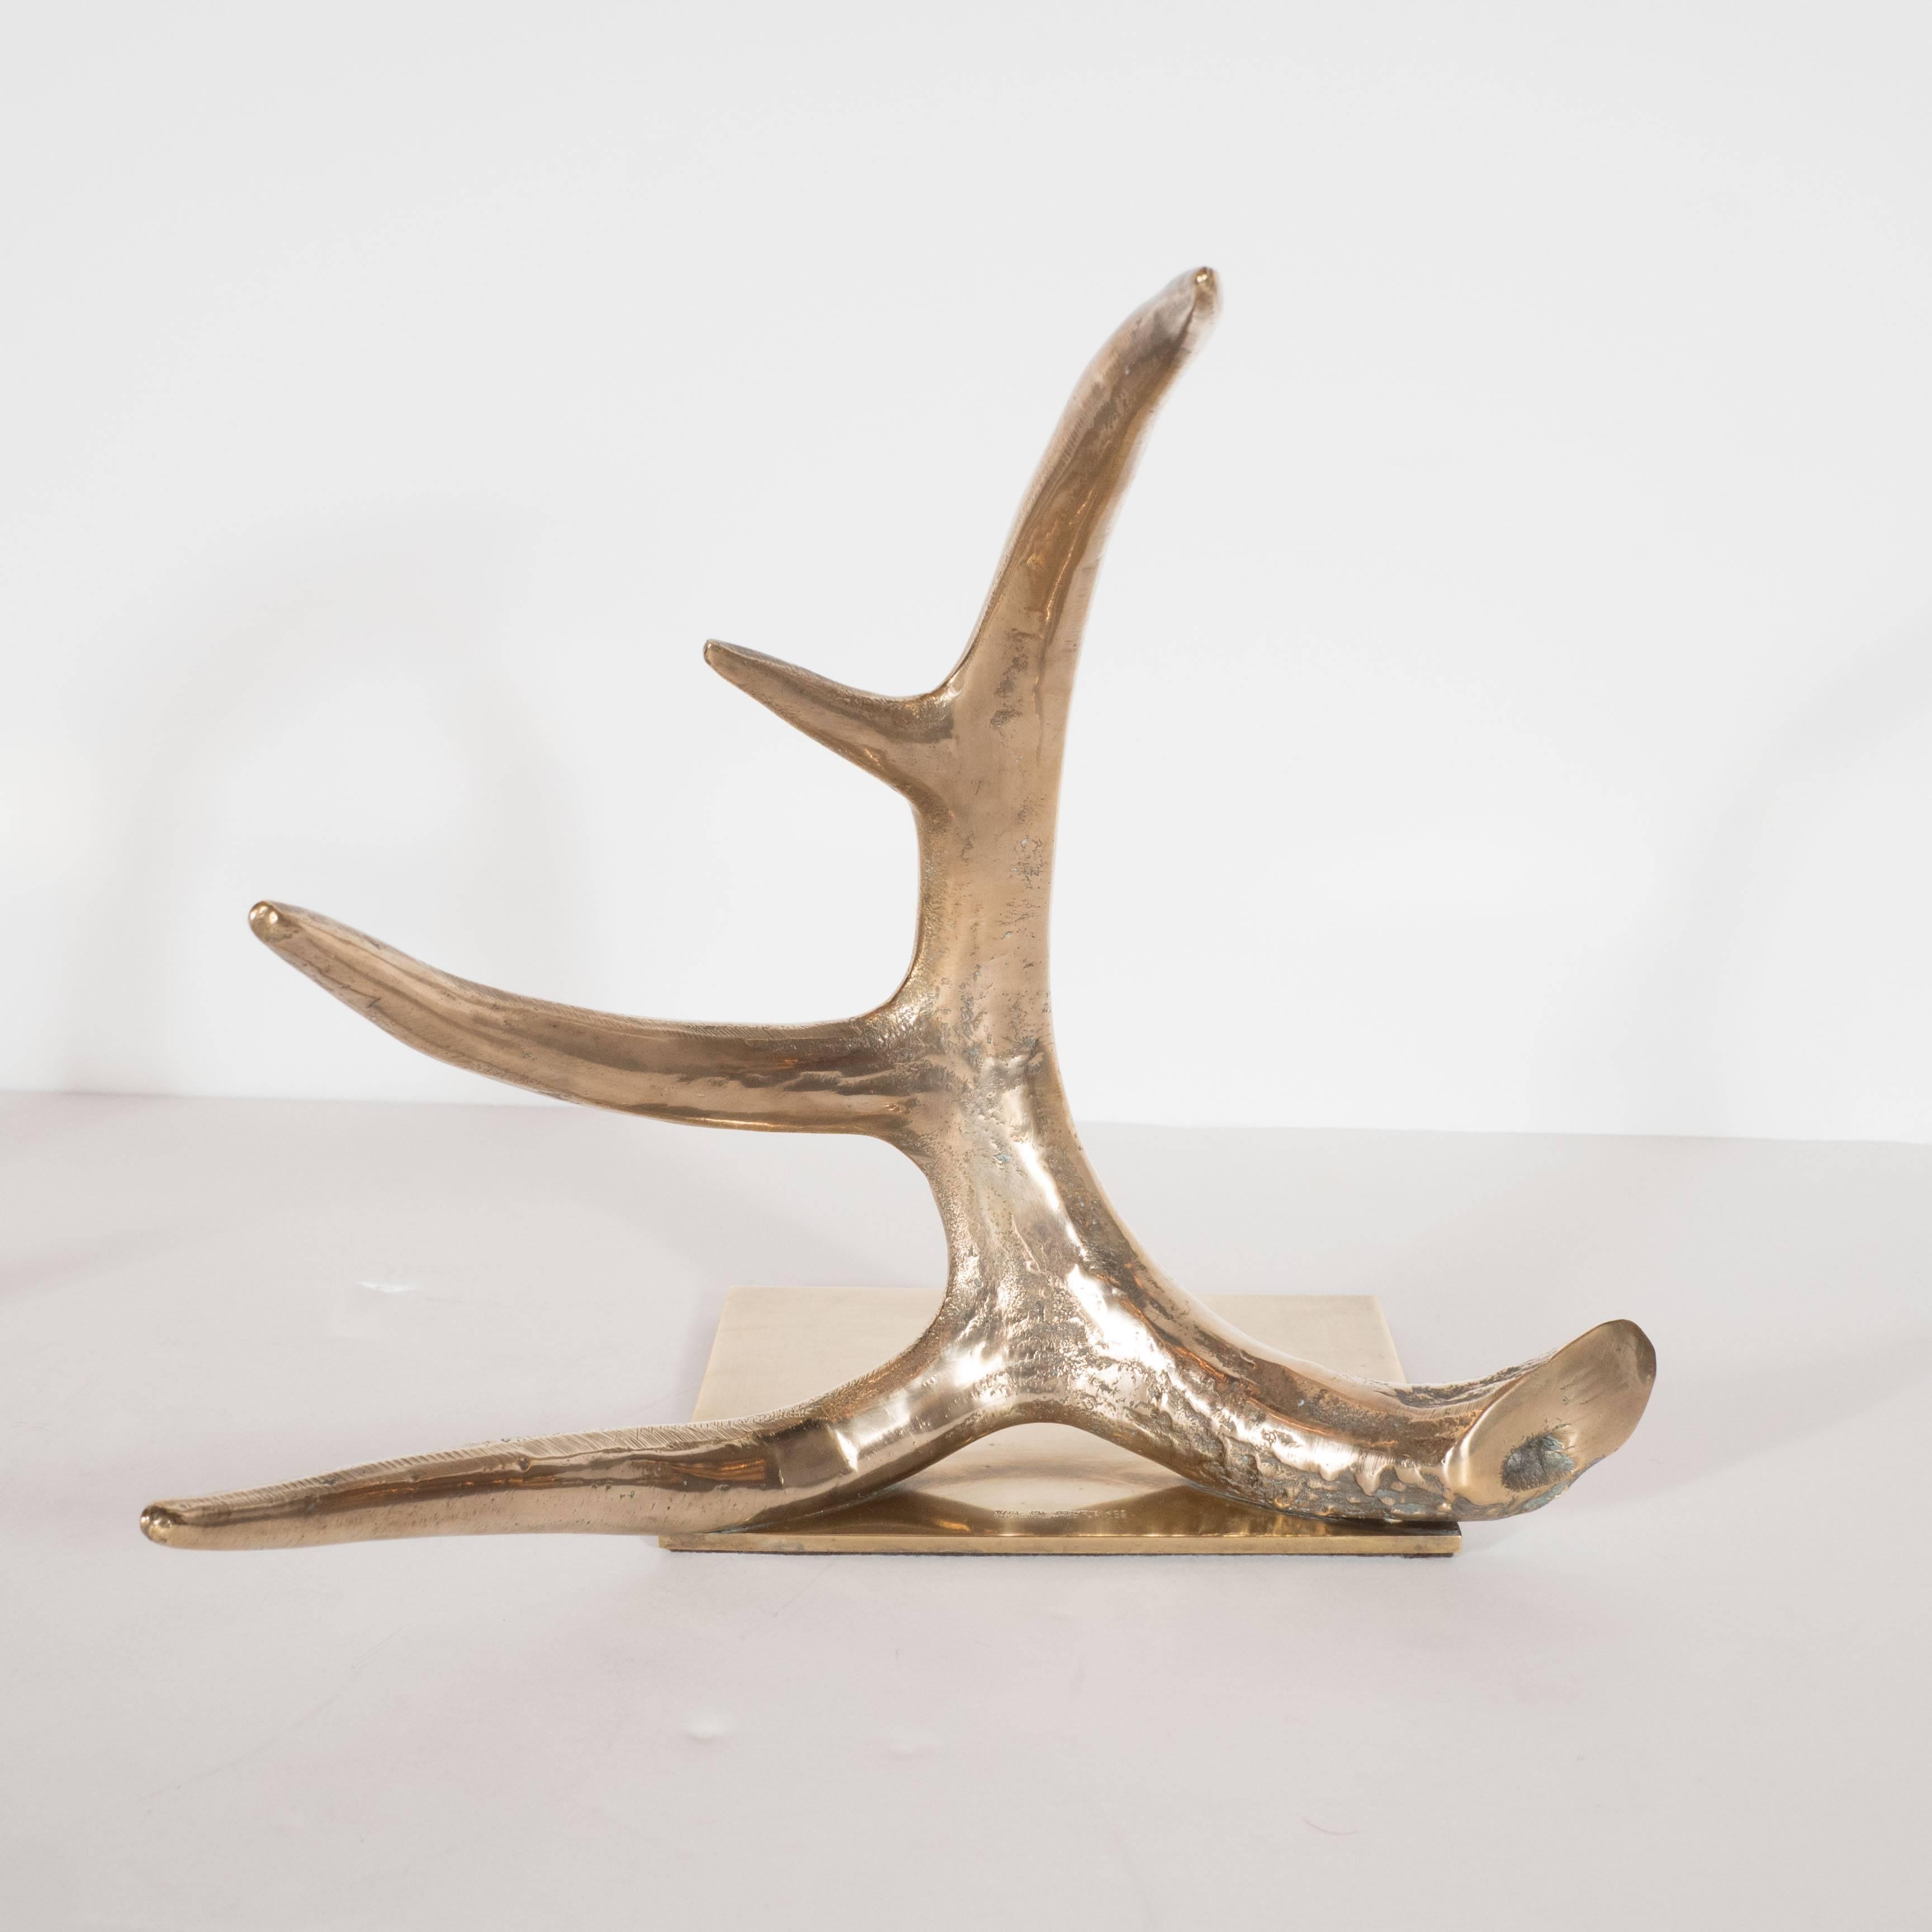 A chic pair of brass antler bookends by Arthur Court, 1978. Polished brass square base plates support mirrored brass antlers. Each features an intricately detailed burr, main beam and four points. The ideal pair to anchor a set of books on a